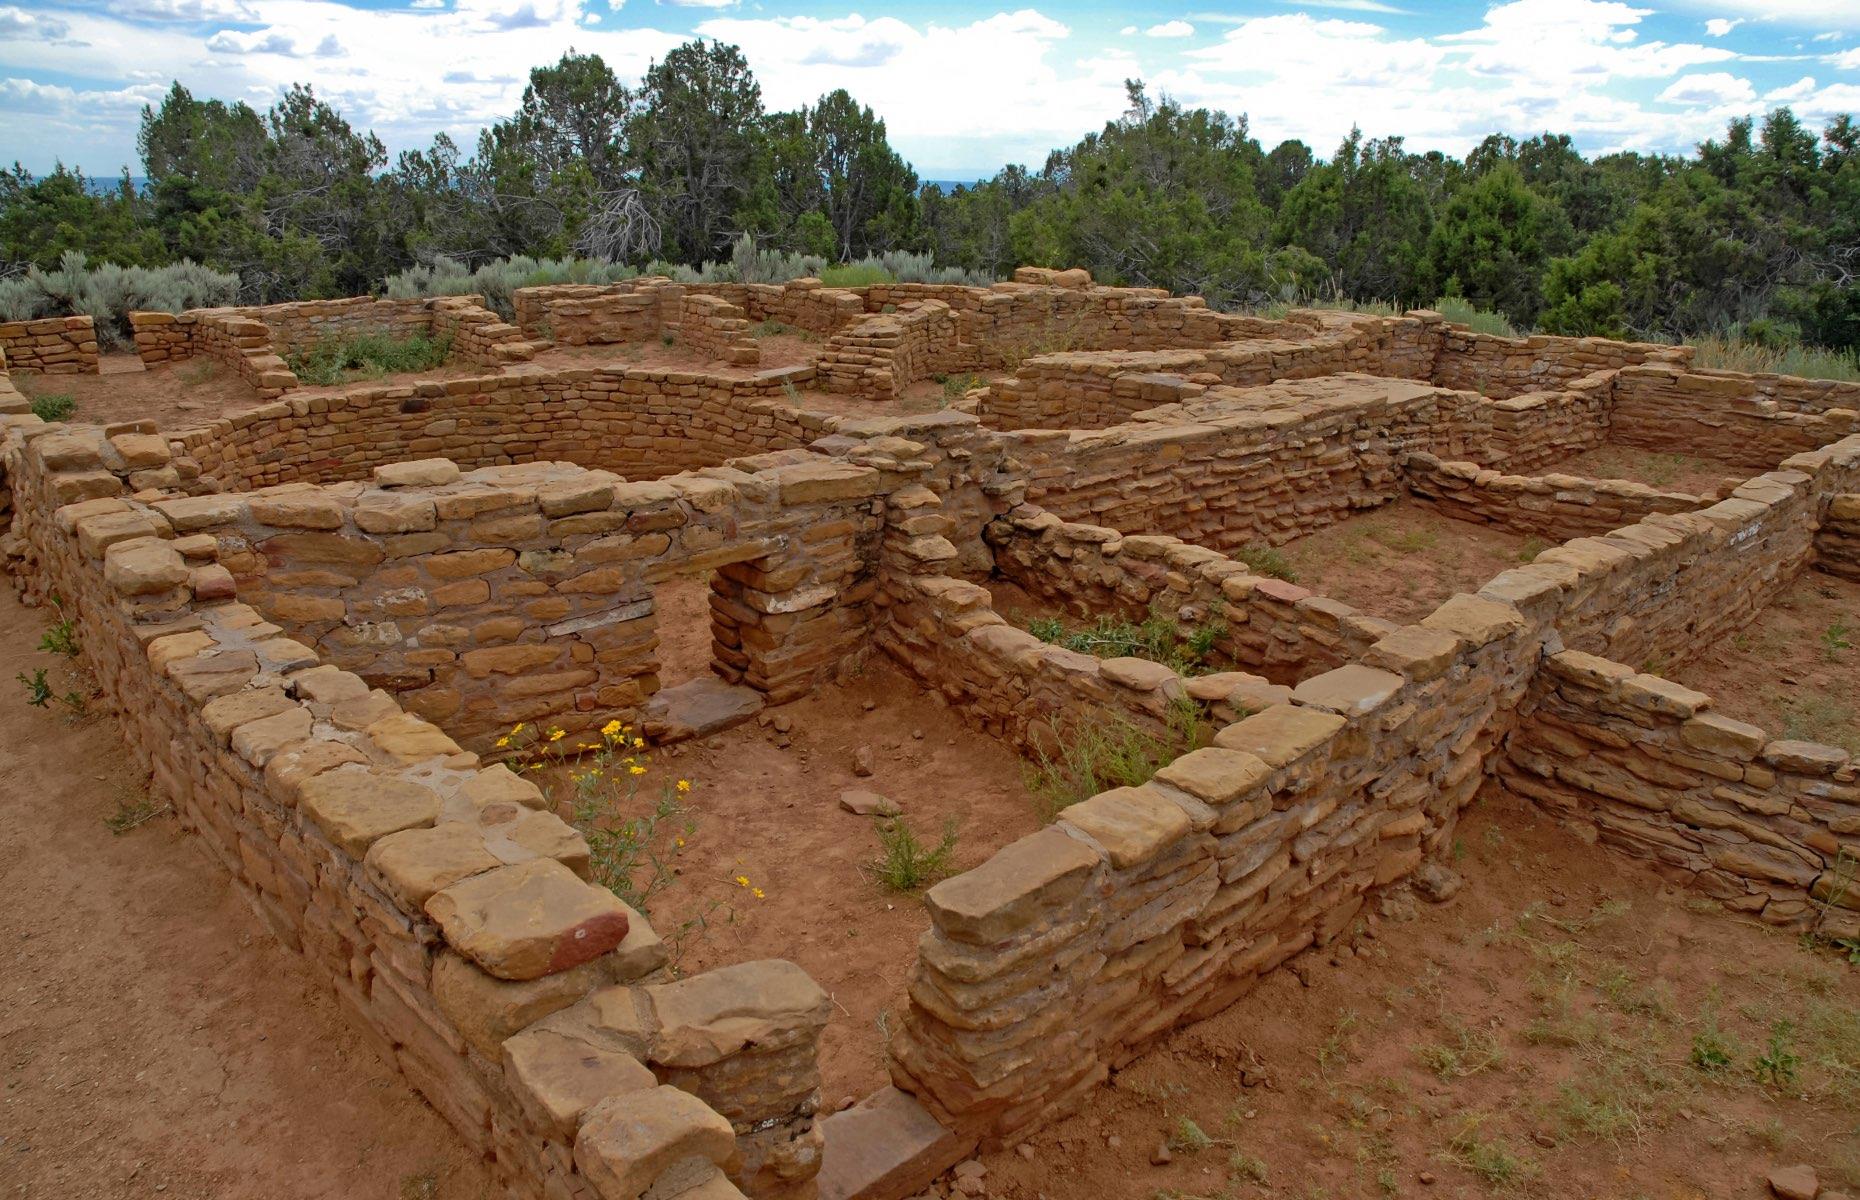 <p>The Ancestral Puebloans lived in Mesa Verde until around AD 1300. Despite building this entire civilization, they migrated south into areas now in New Mexico and Arizona, leaving these incredible communities behind. No one really knows why. Archaeologists, historians and some modern-day Pueblo people speculate that drought, depleted resources or skirmishes with other ancient peoples may have spurred the move. </p>